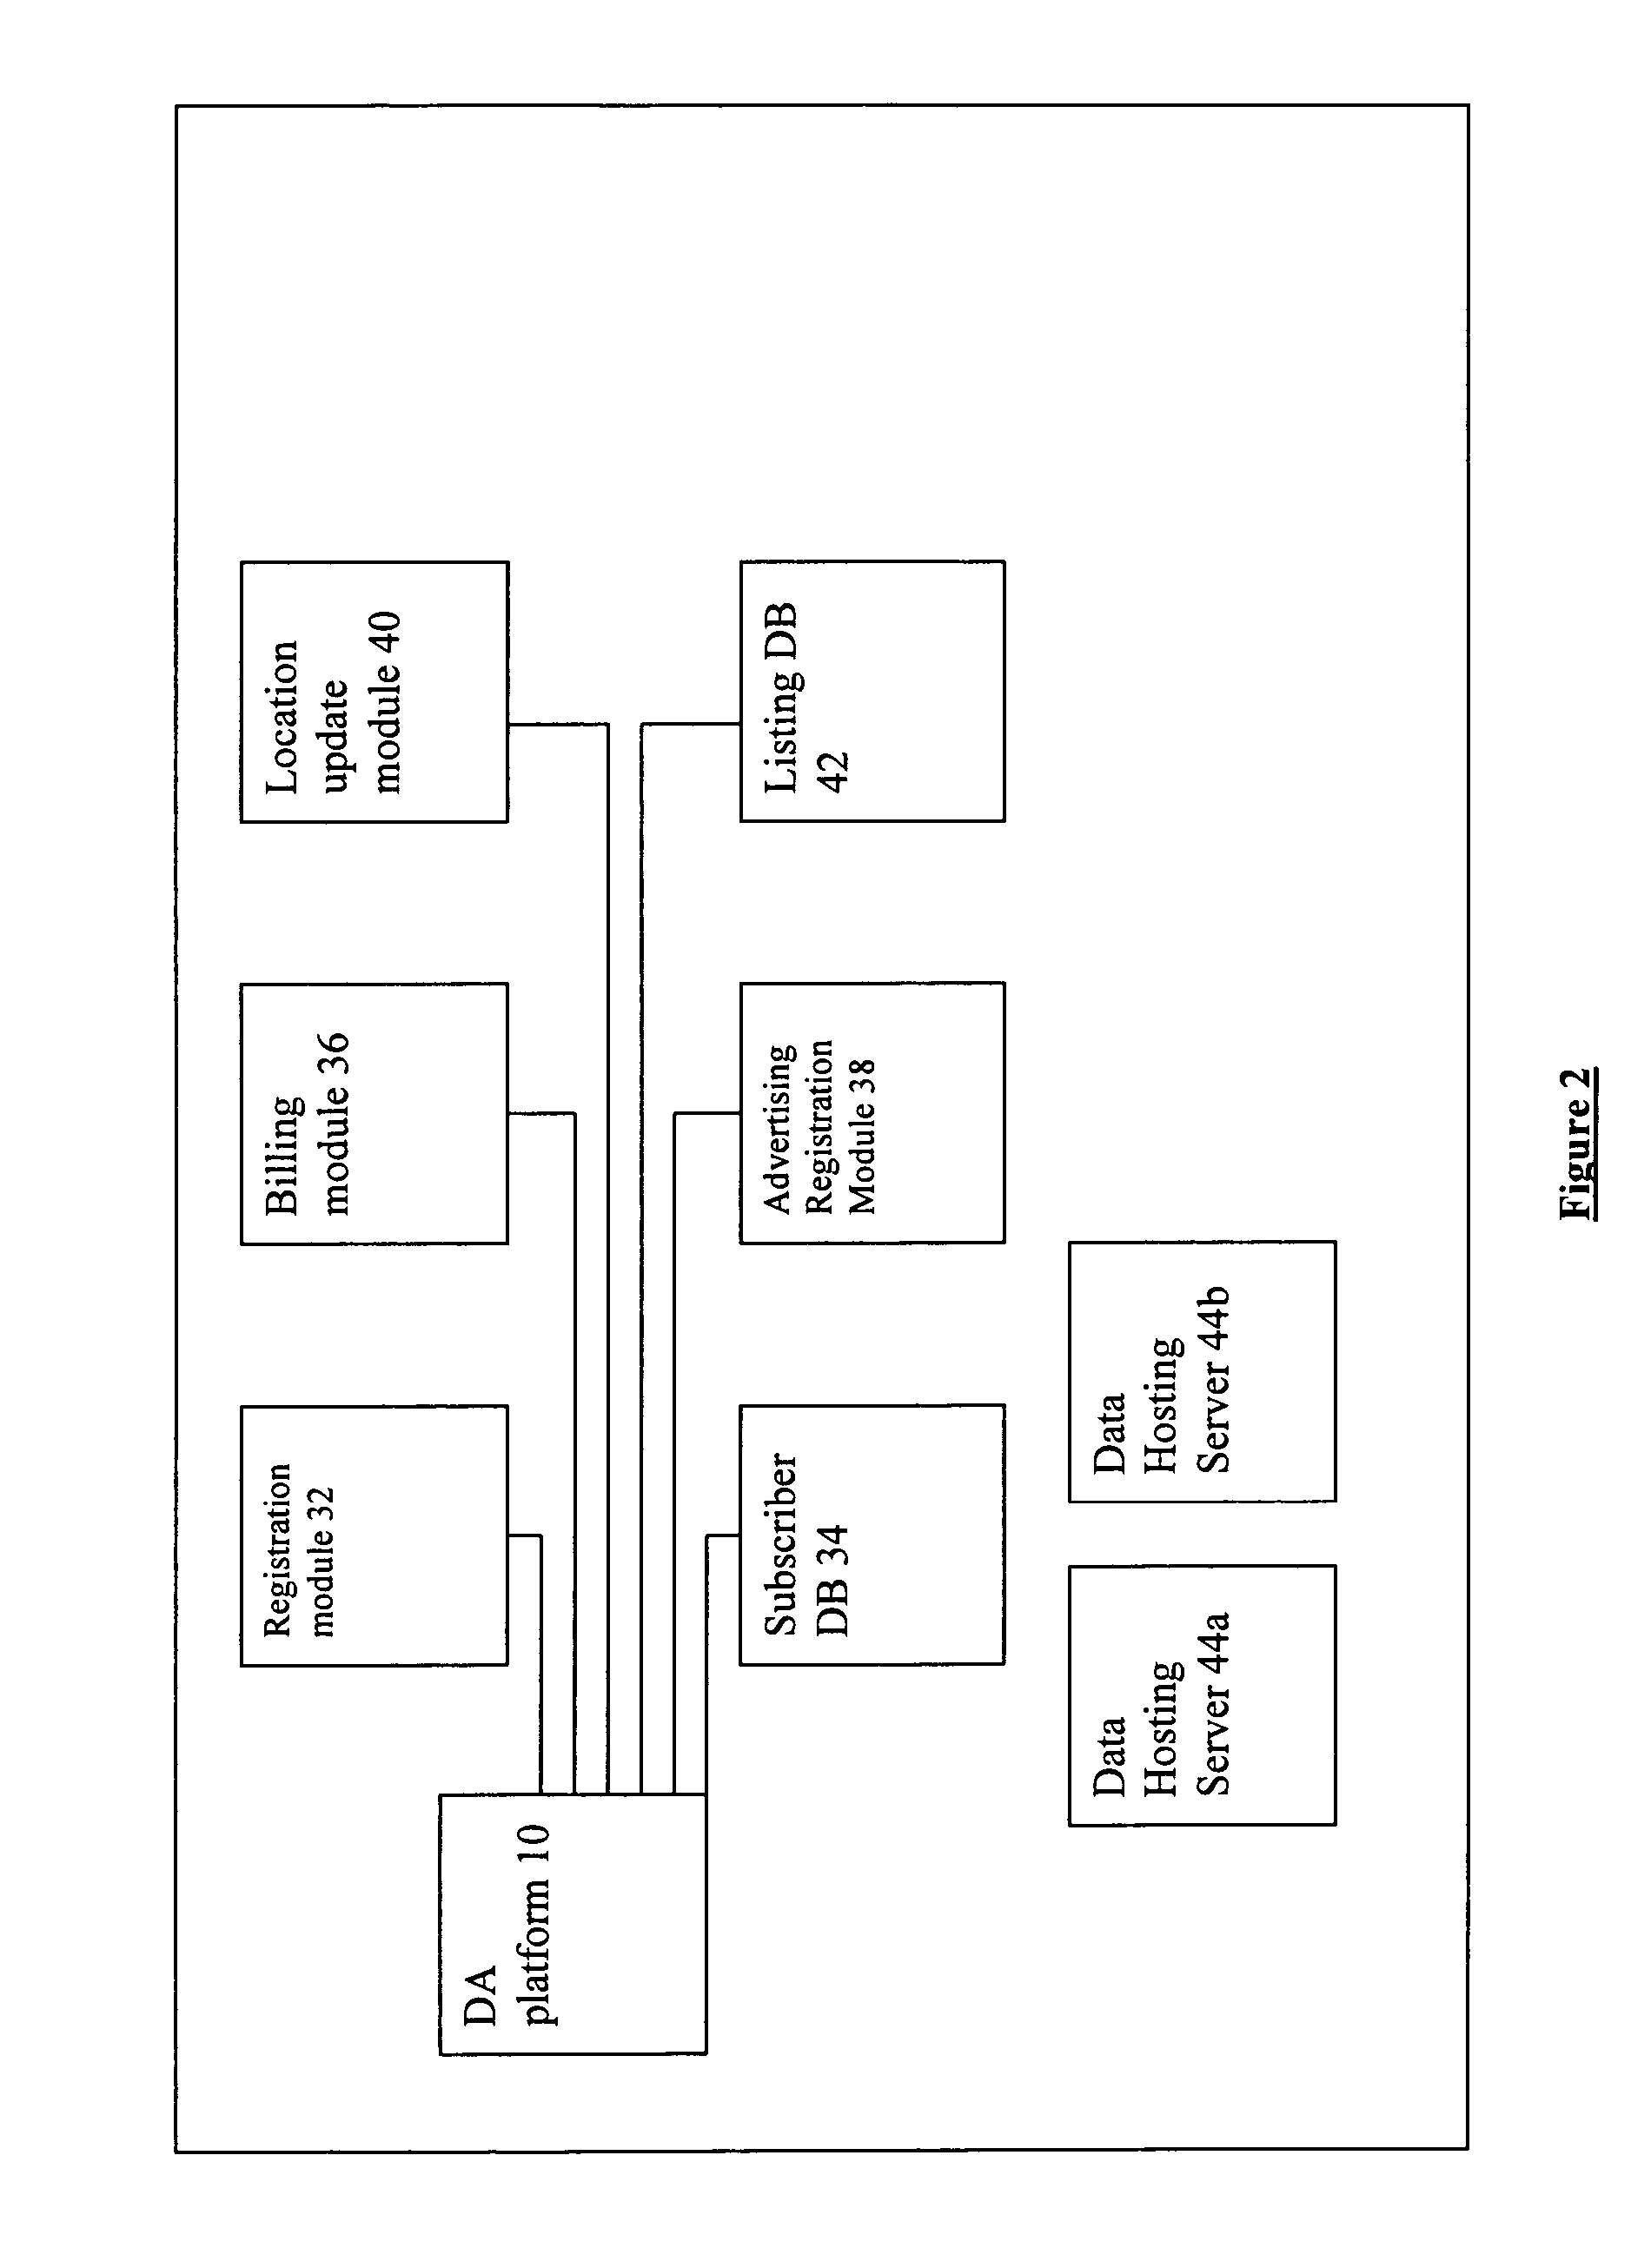 Enhanced directory assistance system and method including location search functions